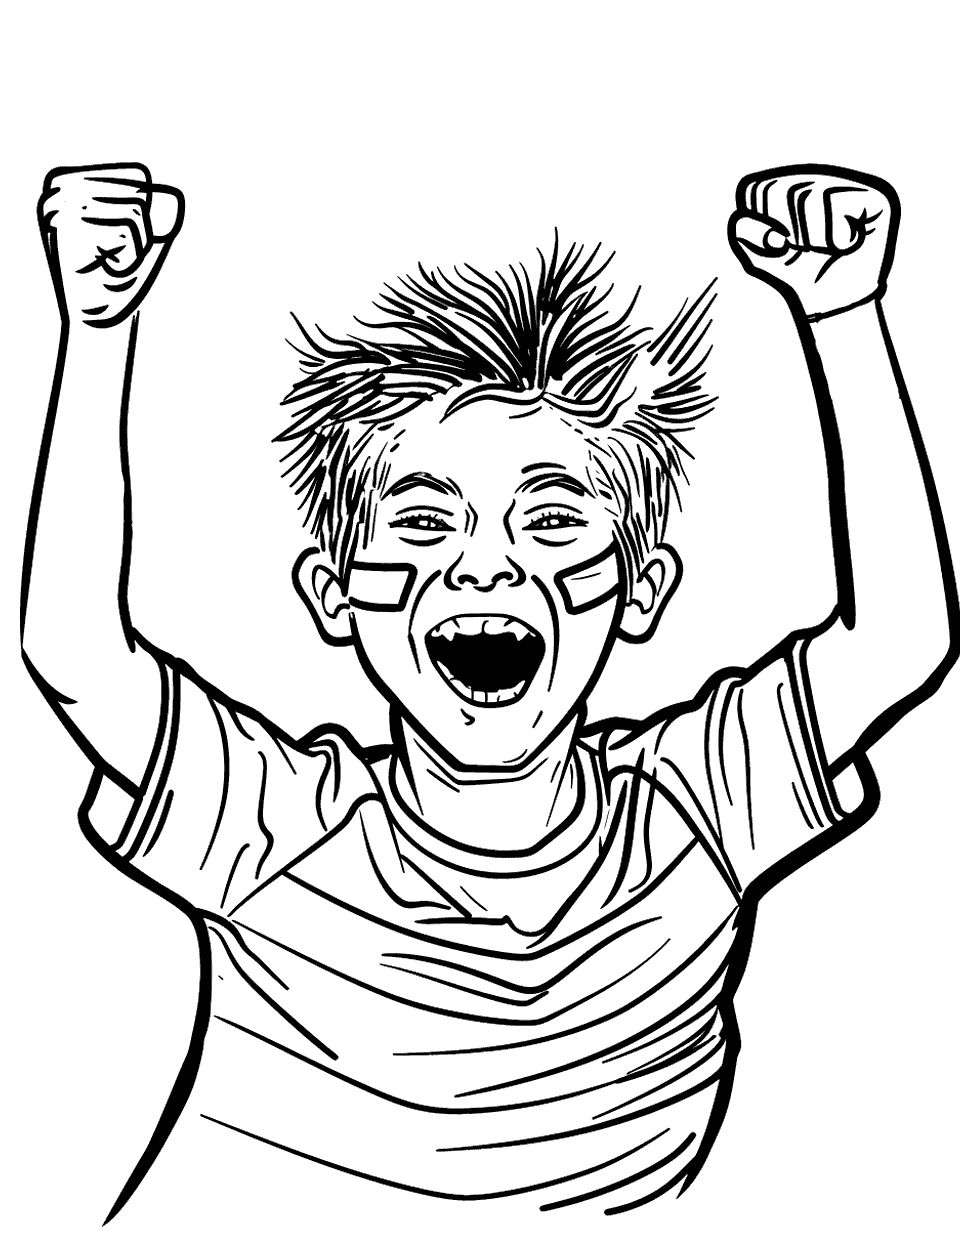 Soccer Fan Face Paint Coloring Page - A kid with their face painted in their favorite soccer team’s colors, cheering.